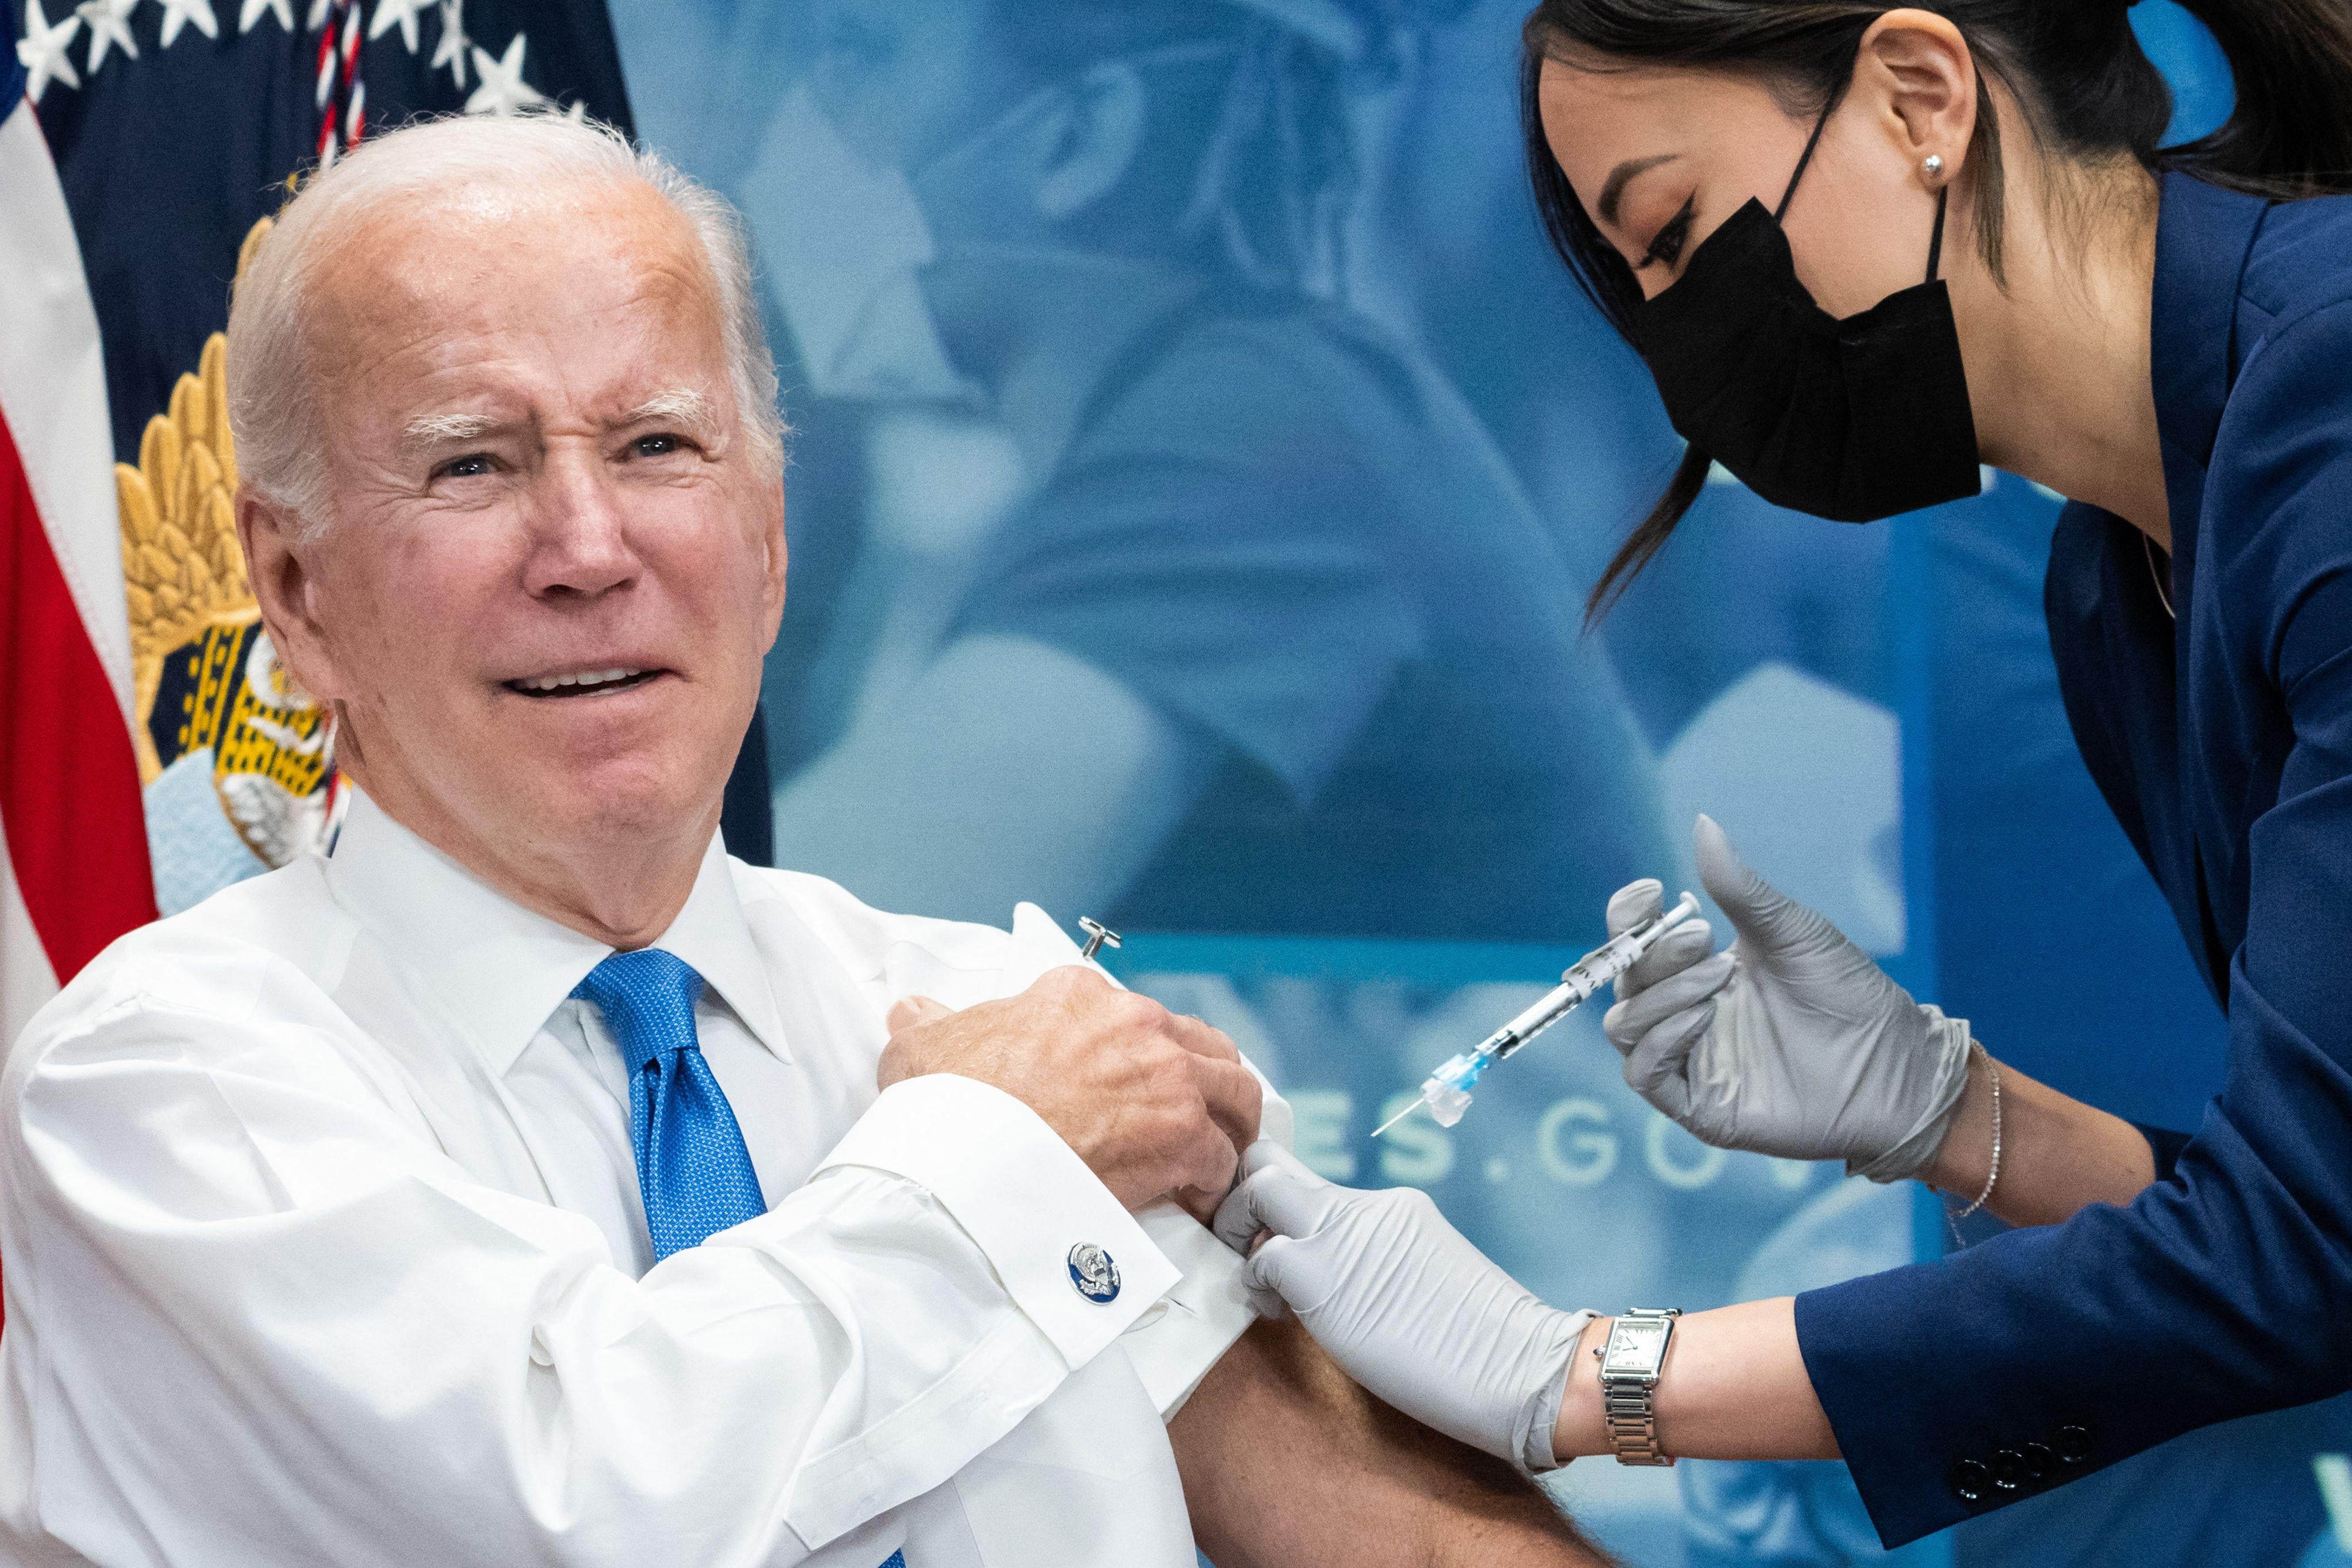 Biden gives a big smile as he gets his jab.